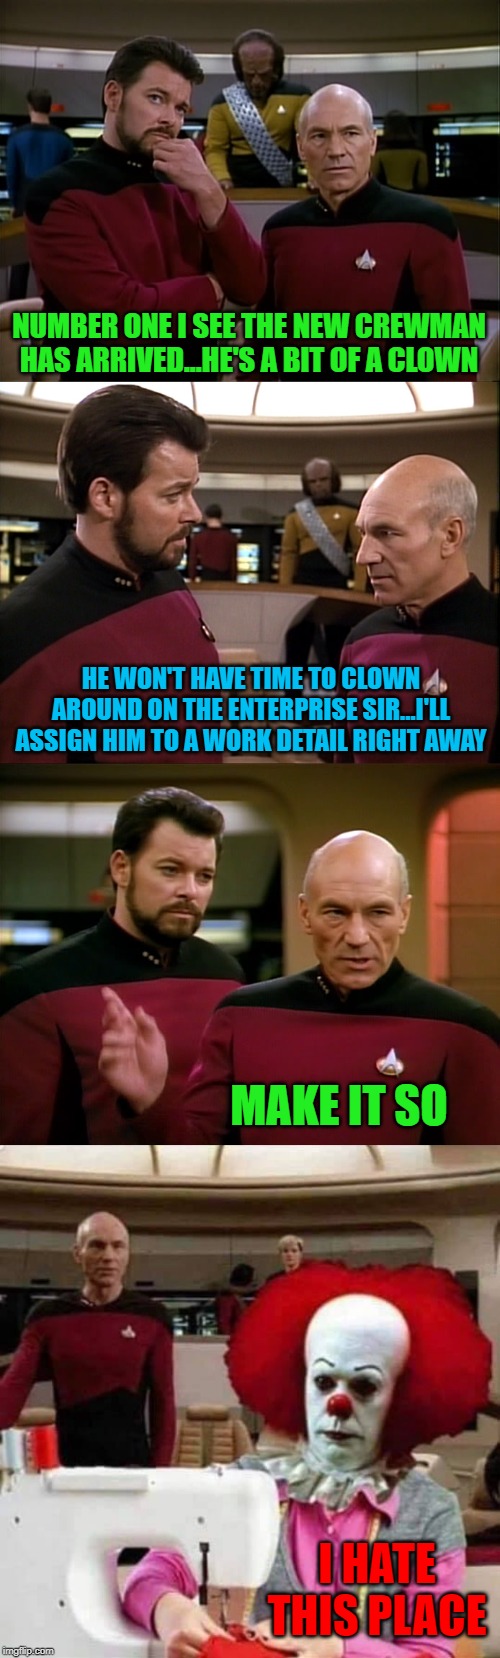 They float up there too! | NUMBER ONE I SEE THE NEW CREWMAN HAS ARRIVED...HE'S A BIT OF A CLOWN; HE WON'T HAVE TIME TO CLOWN AROUND ON THE ENTERPRISE SIR...I'LL ASSIGN HIM TO A WORK DETAIL RIGHT AWAY; MAKE IT SO; I HATE THIS PLACE | image tagged in make it so,memes,picard and riker,funny,pennywise,it | made w/ Imgflip meme maker